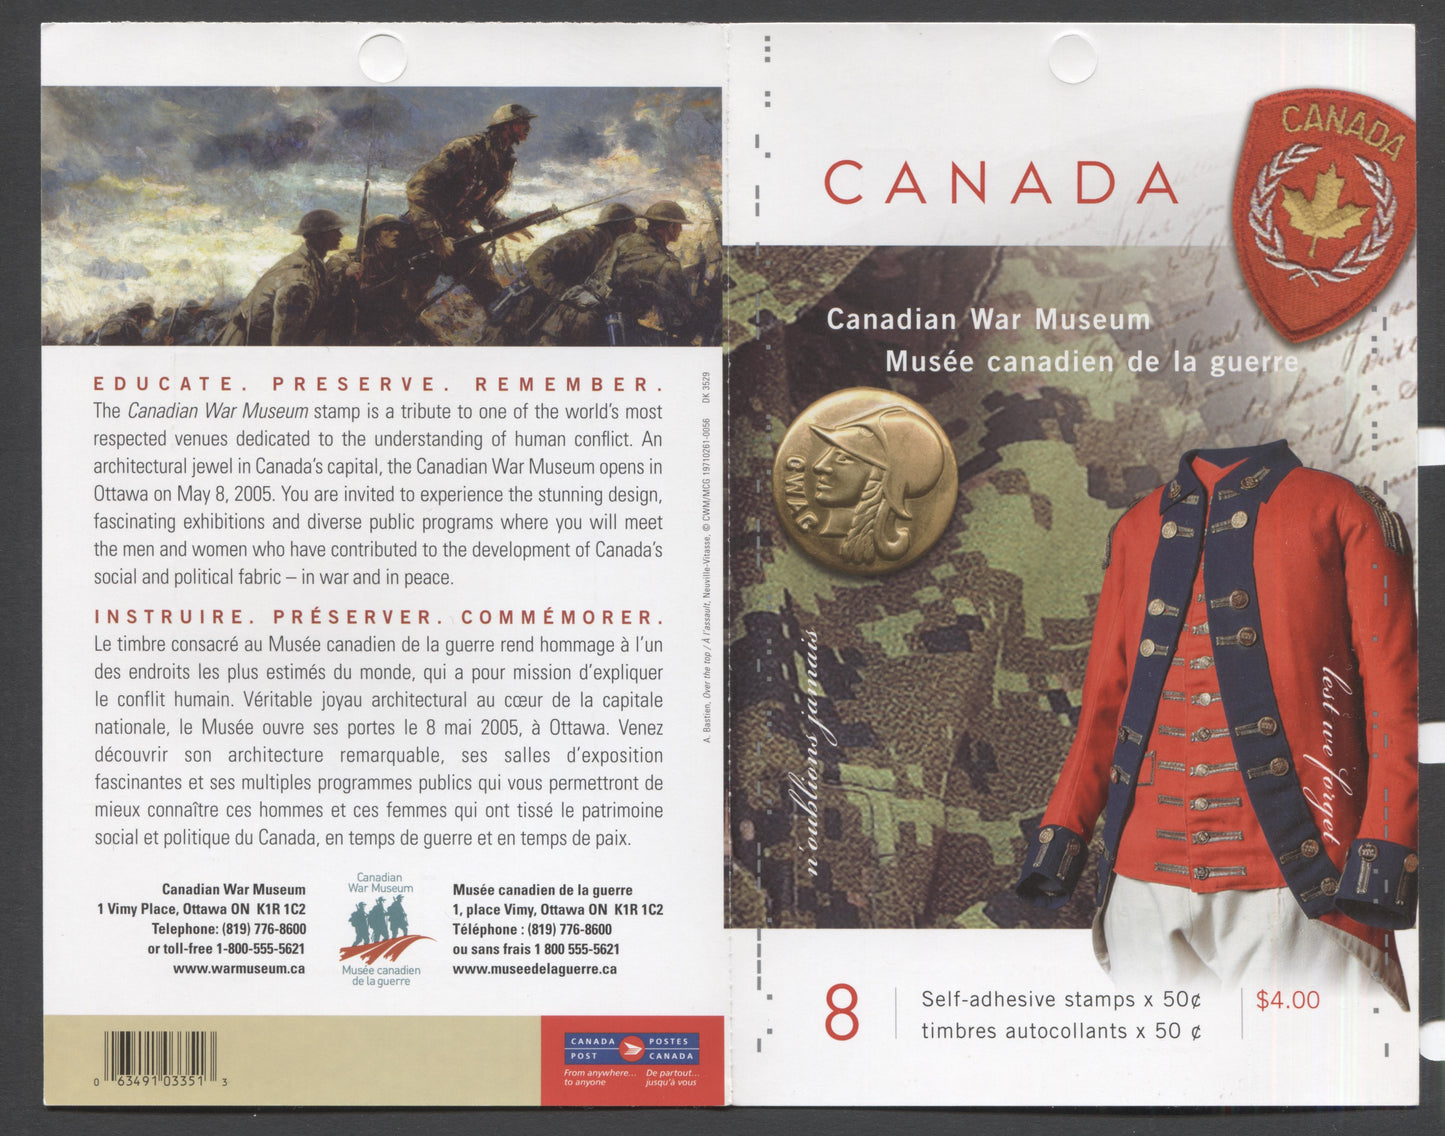 Canada #BK311 2005 Canadian War Museum Issue, Complete $4 Booklet, Tullis Russell Coatings Paper, Dead Paper, 4 mm GT-4 Tagging